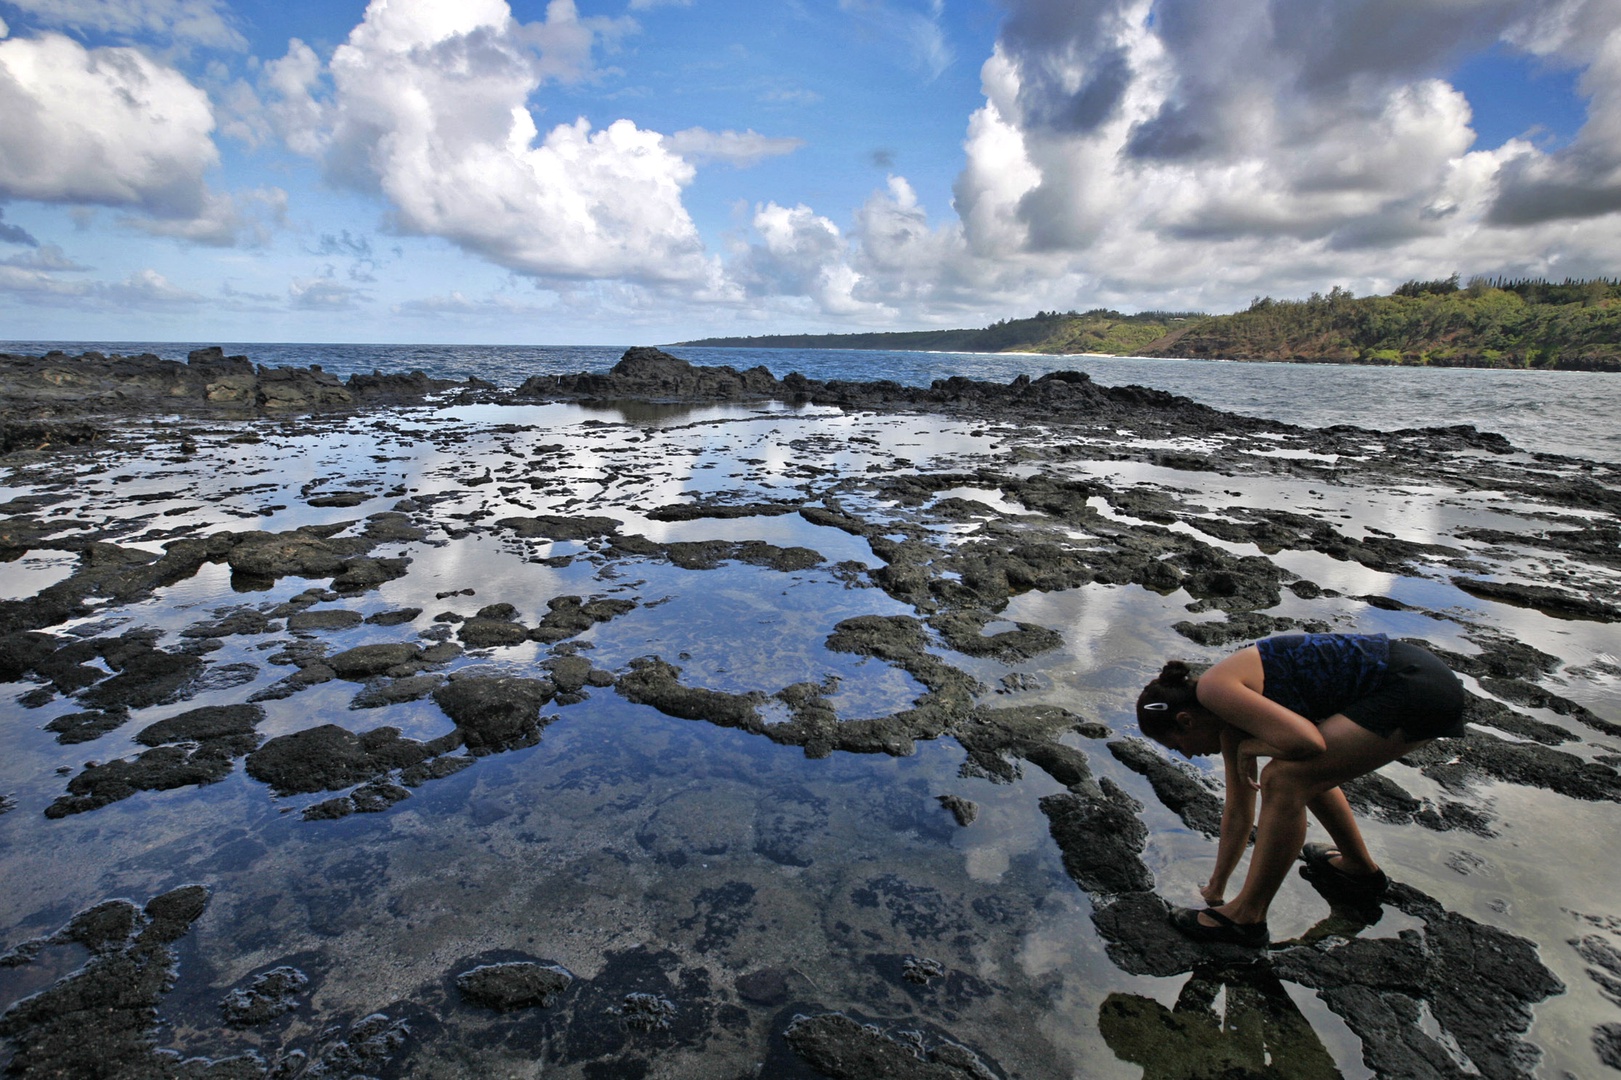 Koloa Vacation Rentals, Pili Mai 7J - Search for shells in the tidal pools!